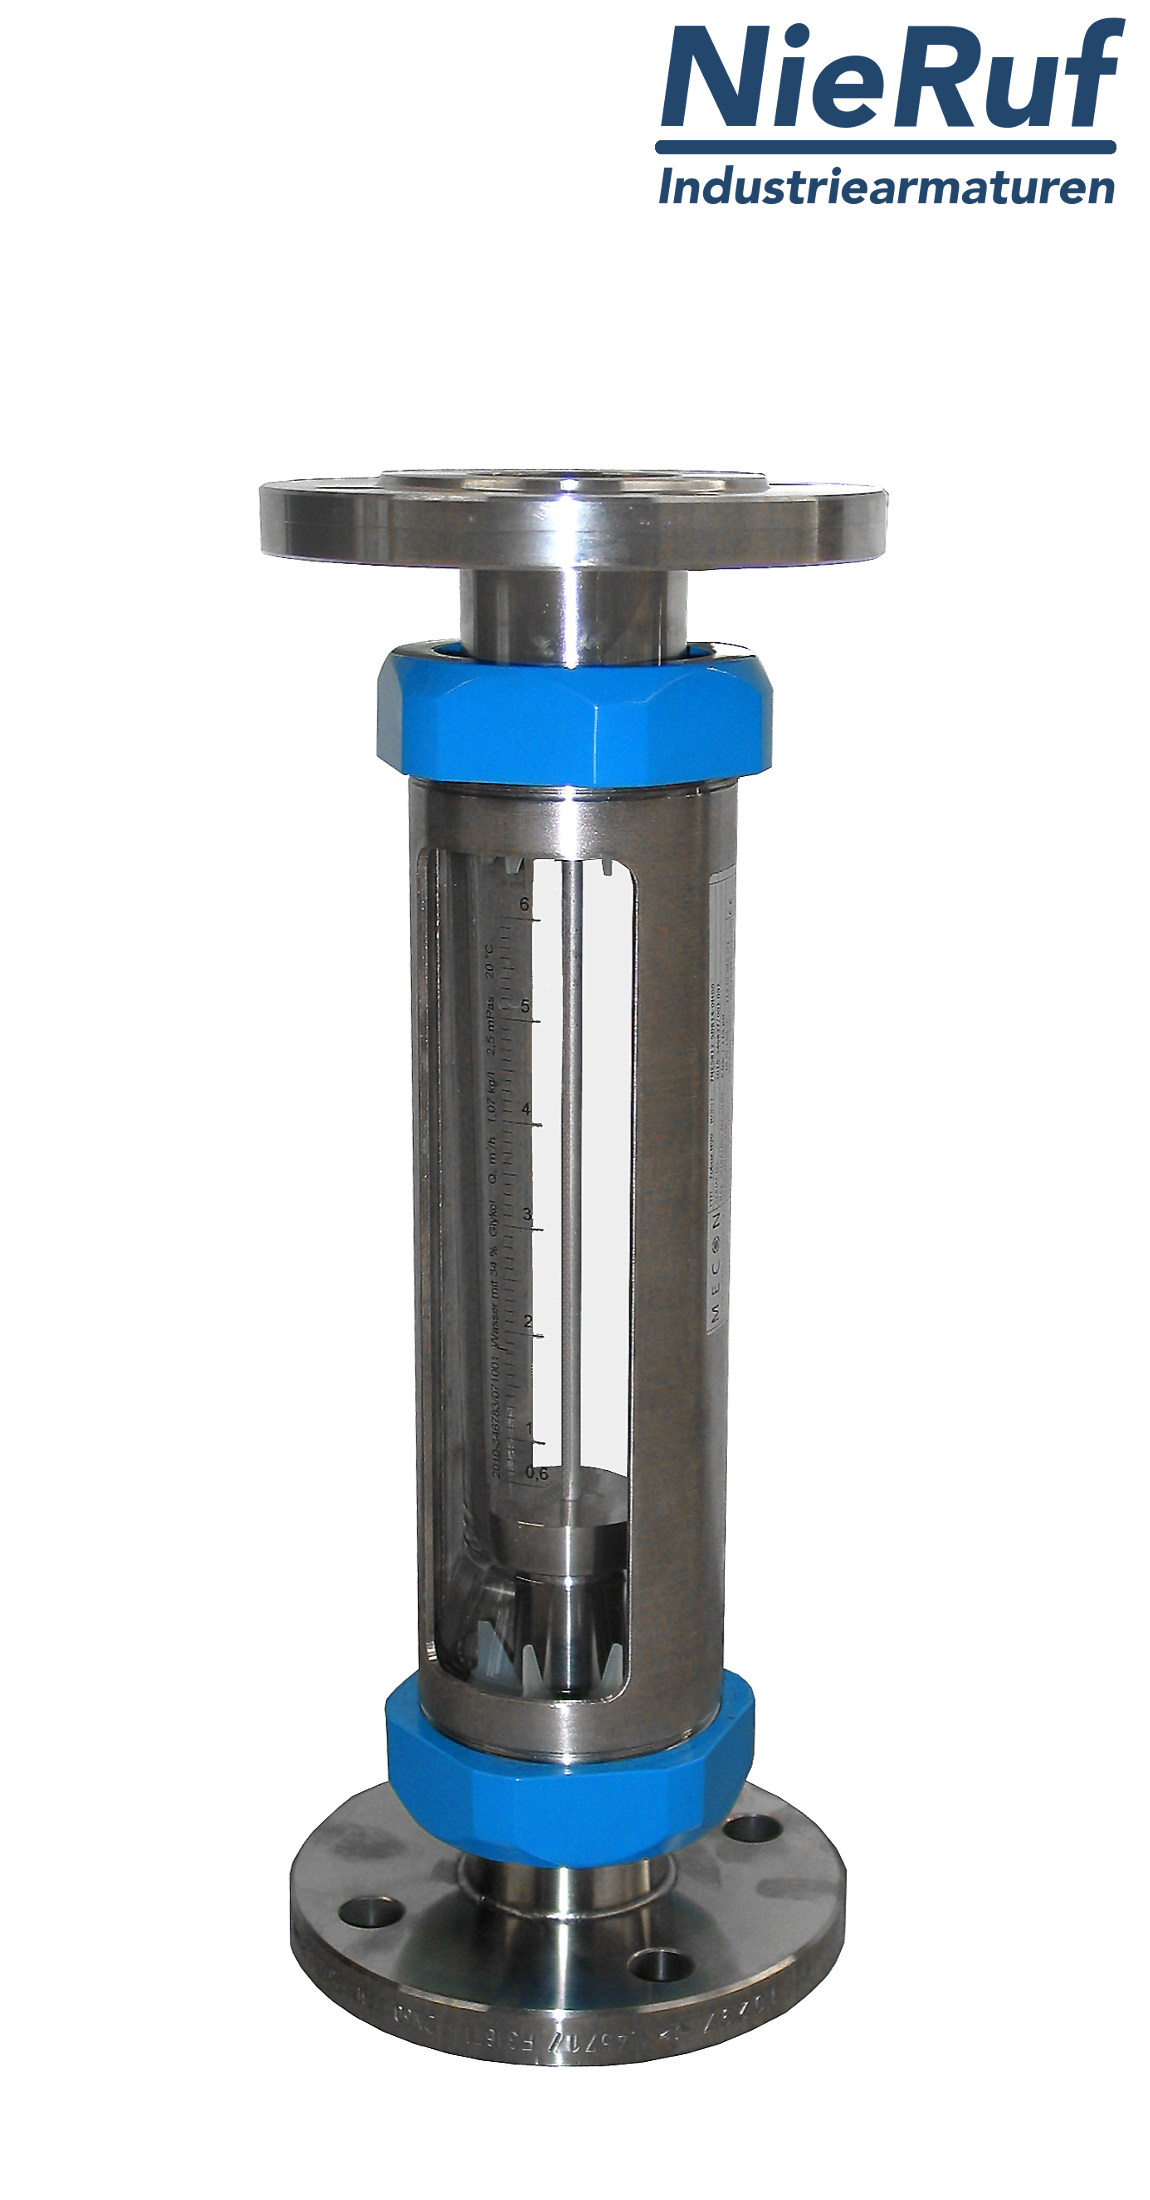 Variable area flowmeter stainless steel + borosilicate flange DN10 3.0 - 30.0 l/h water FKM